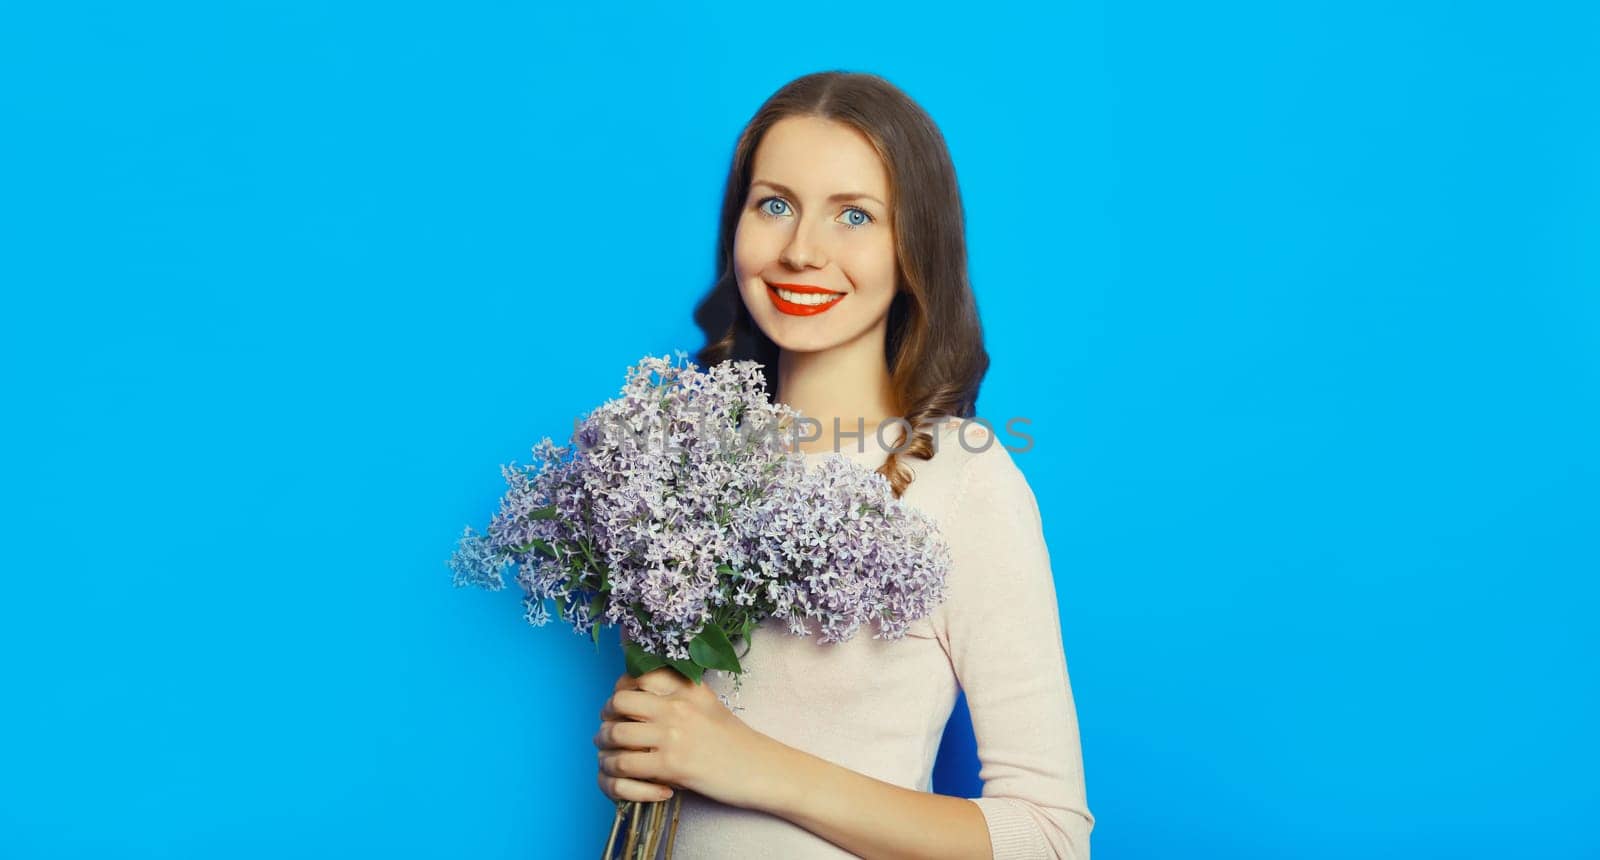 Portrait of happy smiling woman with bouquet of flowers on blue background by Rohappy